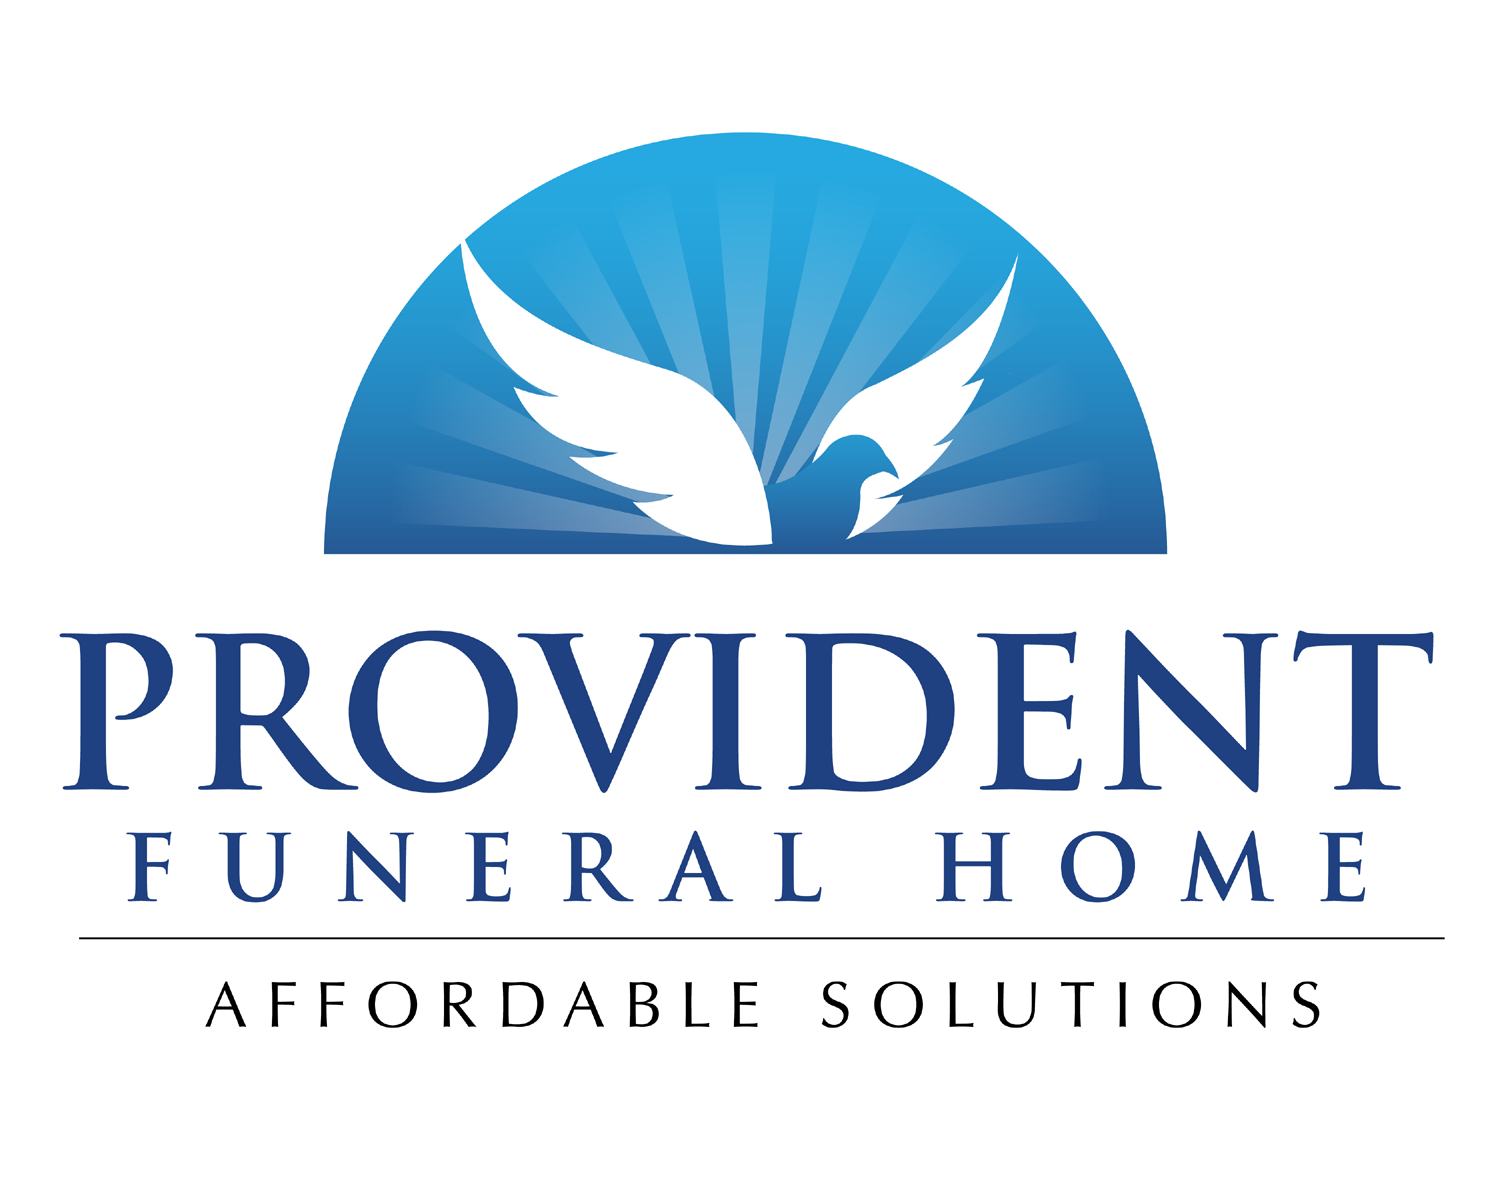 Provident Funeral Home Affordable Solutions Logo